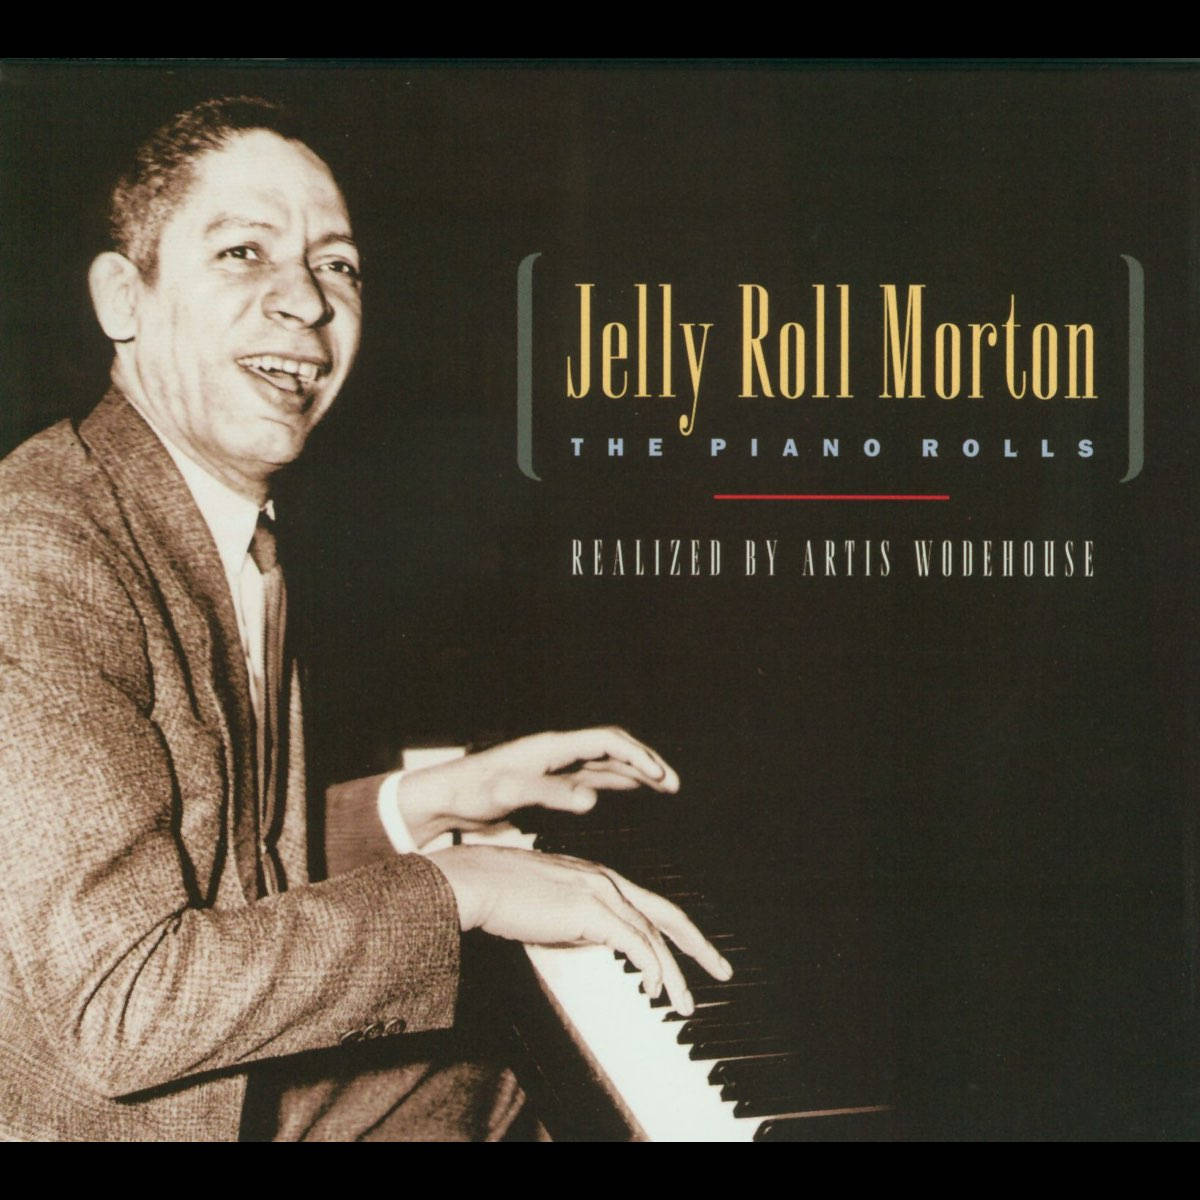 Piano Rolls af Jelly Roll Morton. Wallpaper